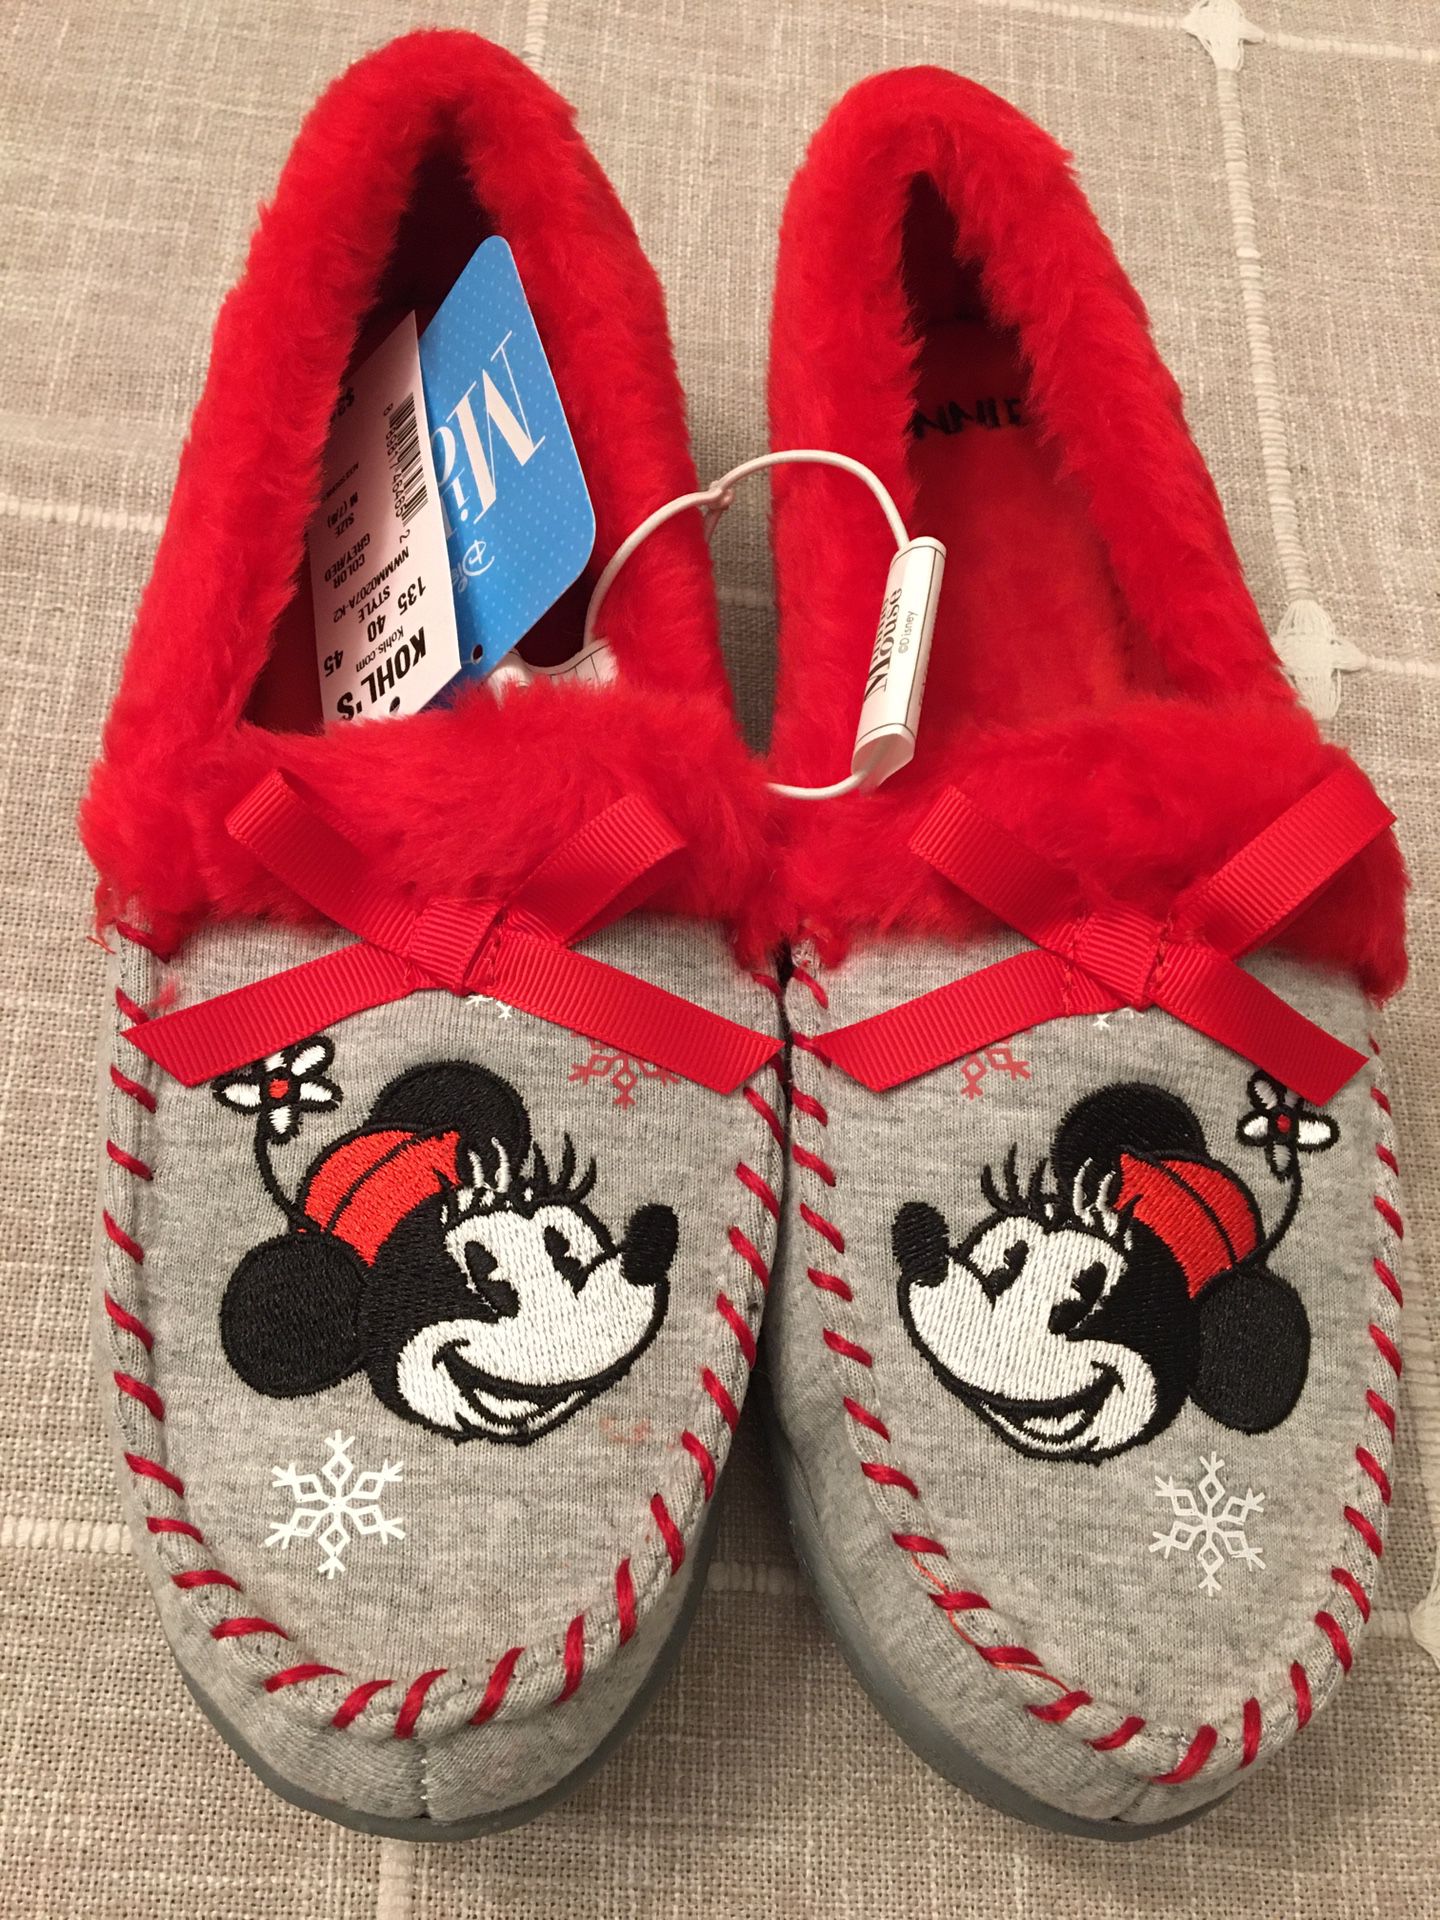 NEW! Women’s Minnie Mouse slippers size 7/8